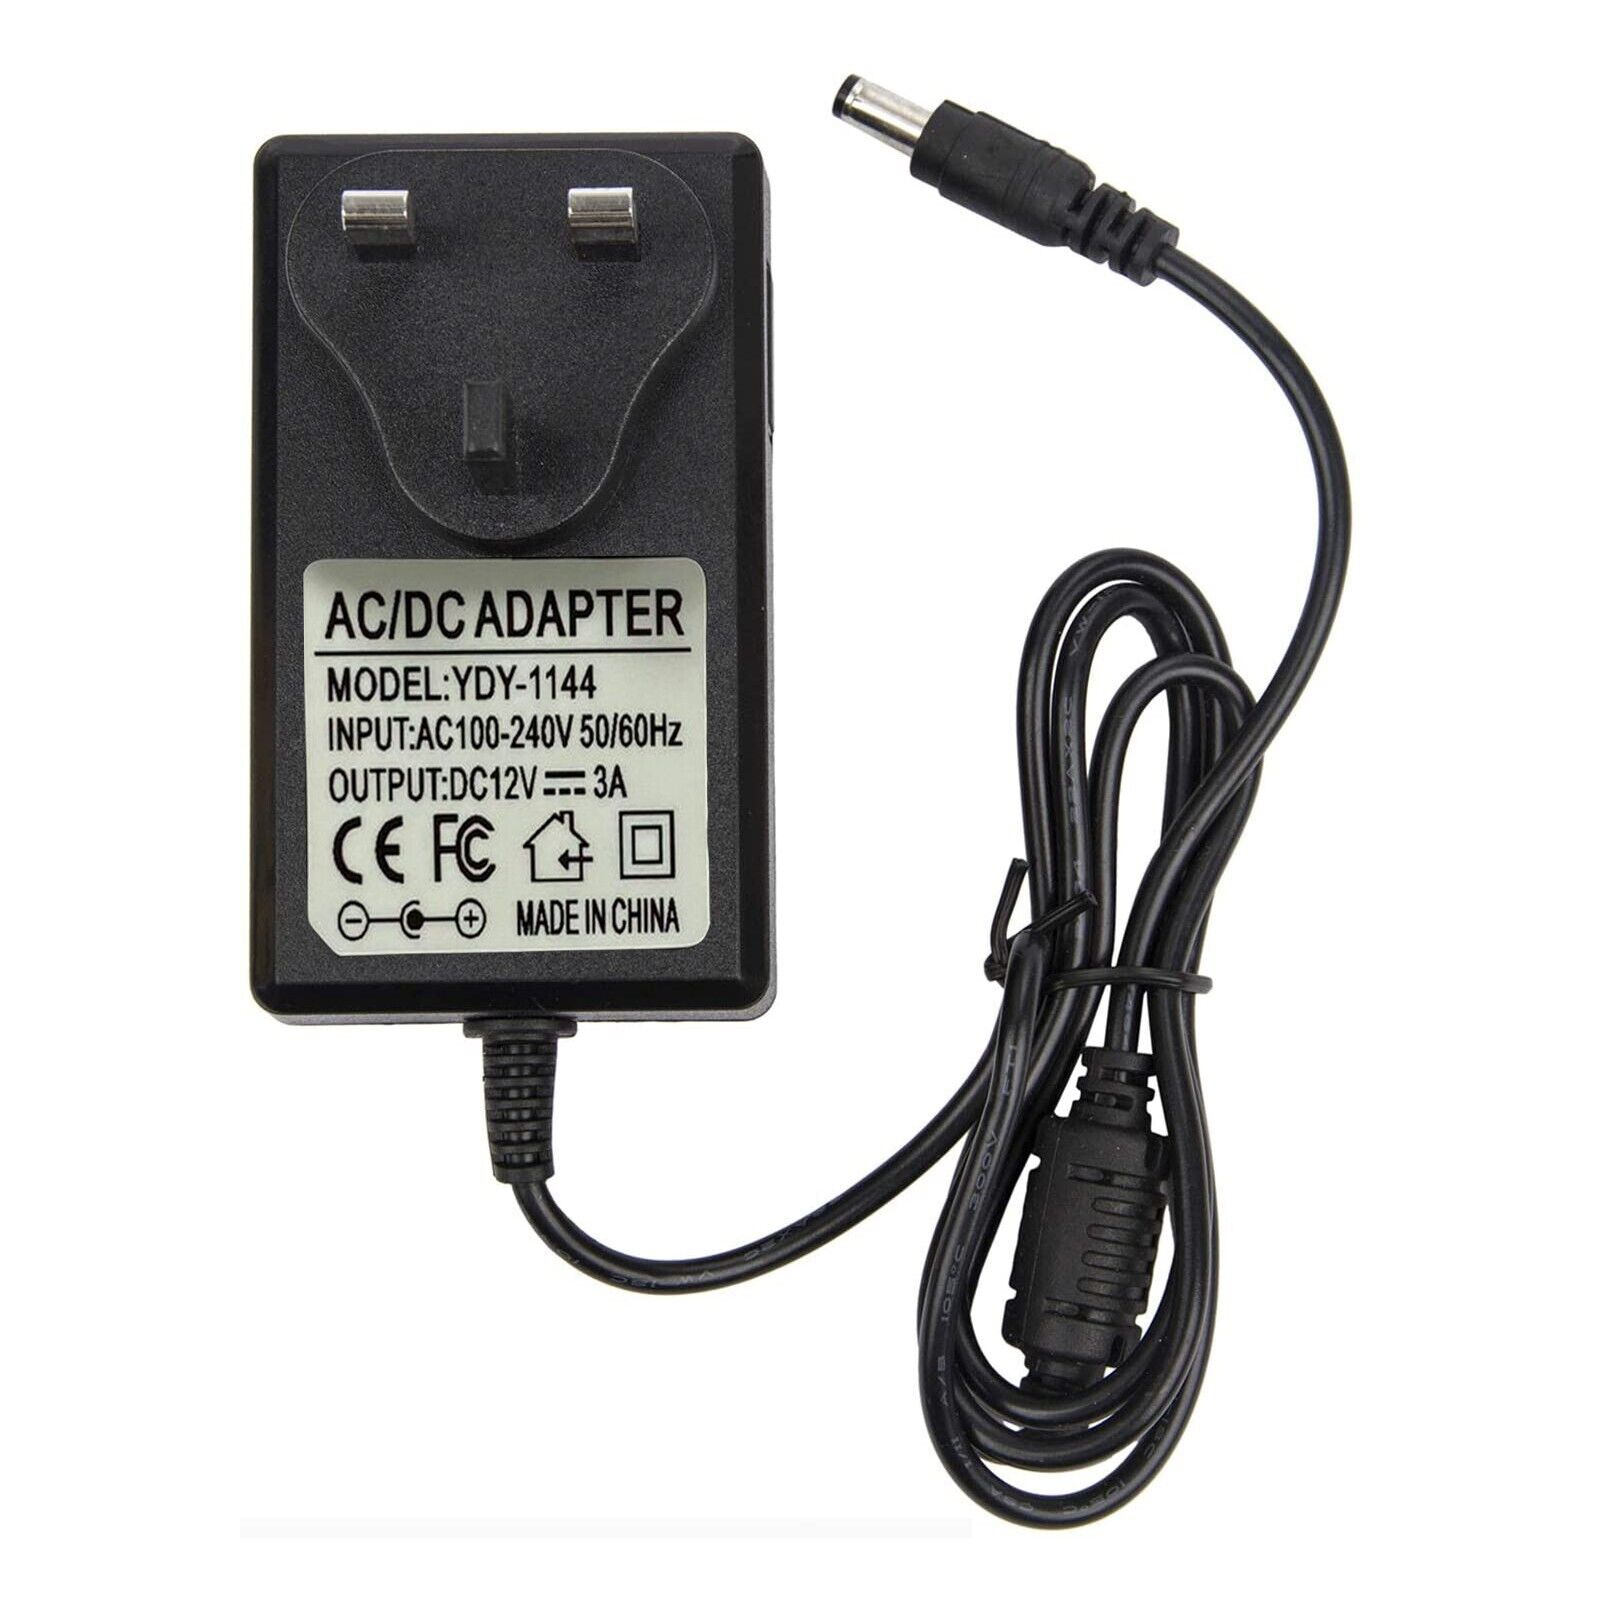 *Brand NEW* 220V 12V 3A AC/DC Adapter For YDY-1144 LED Strip CCTV Camera Power Supply Charger